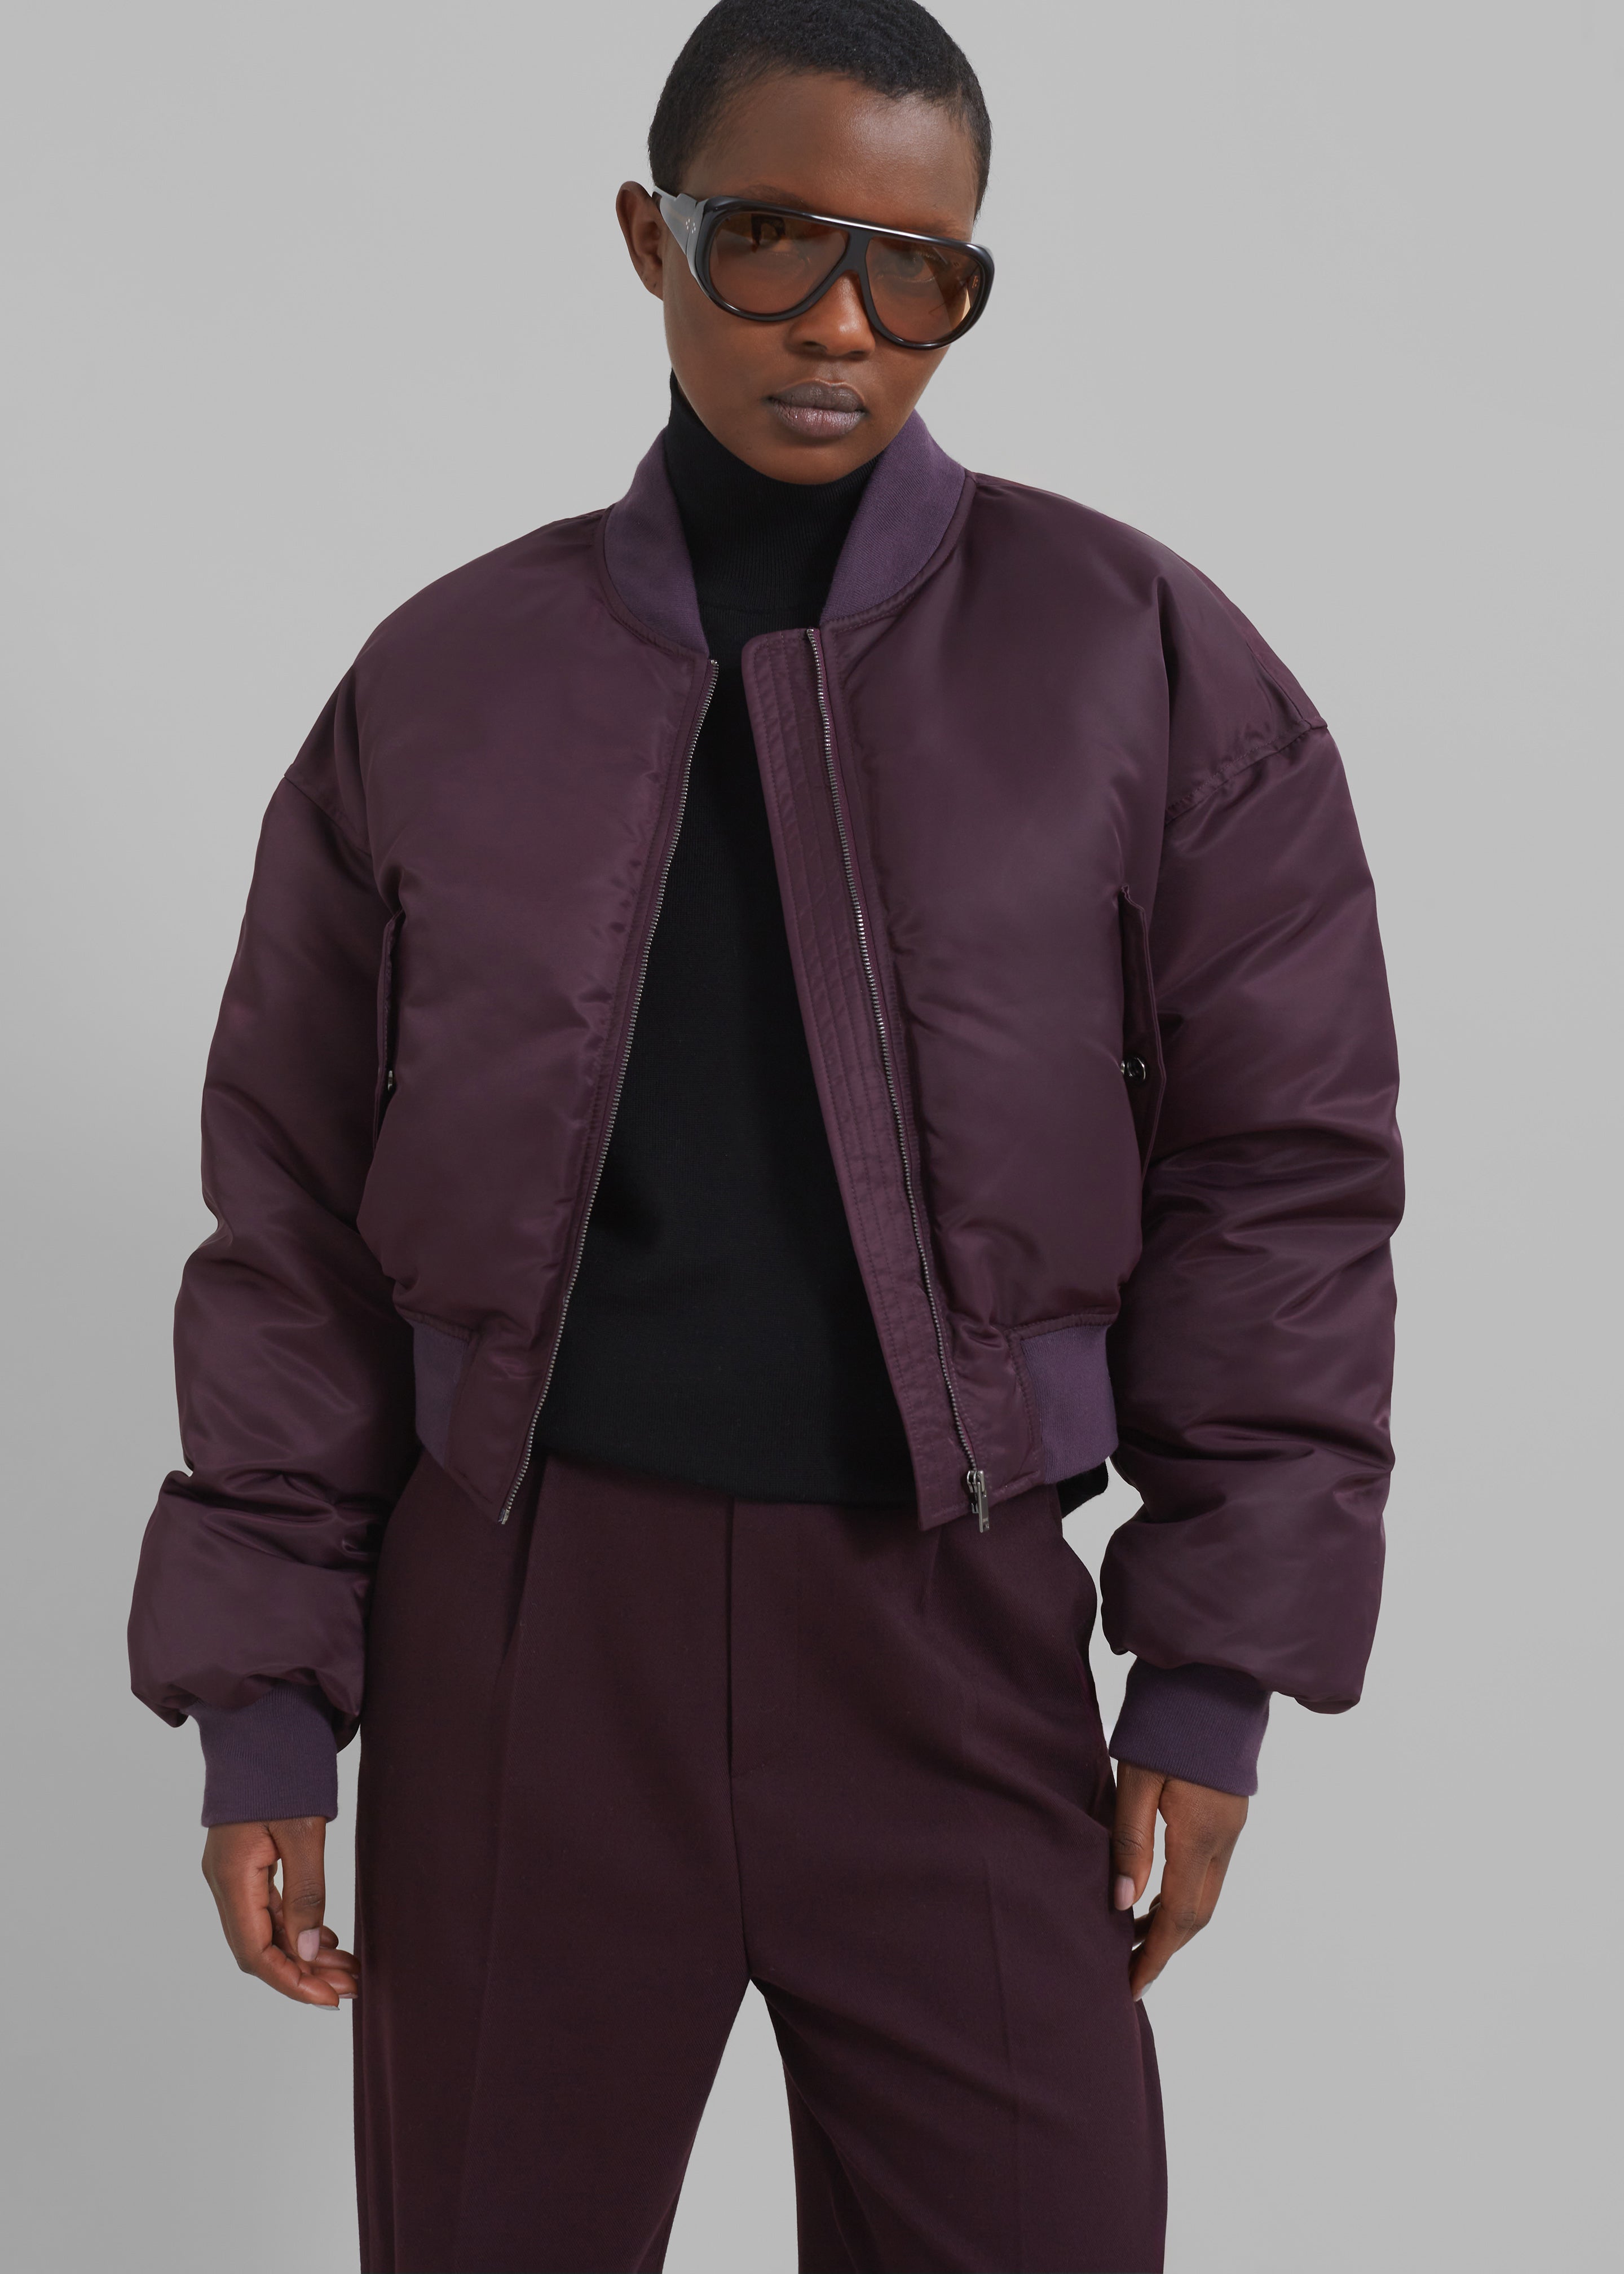 Houghton Cropped Bomber - Prune - 7